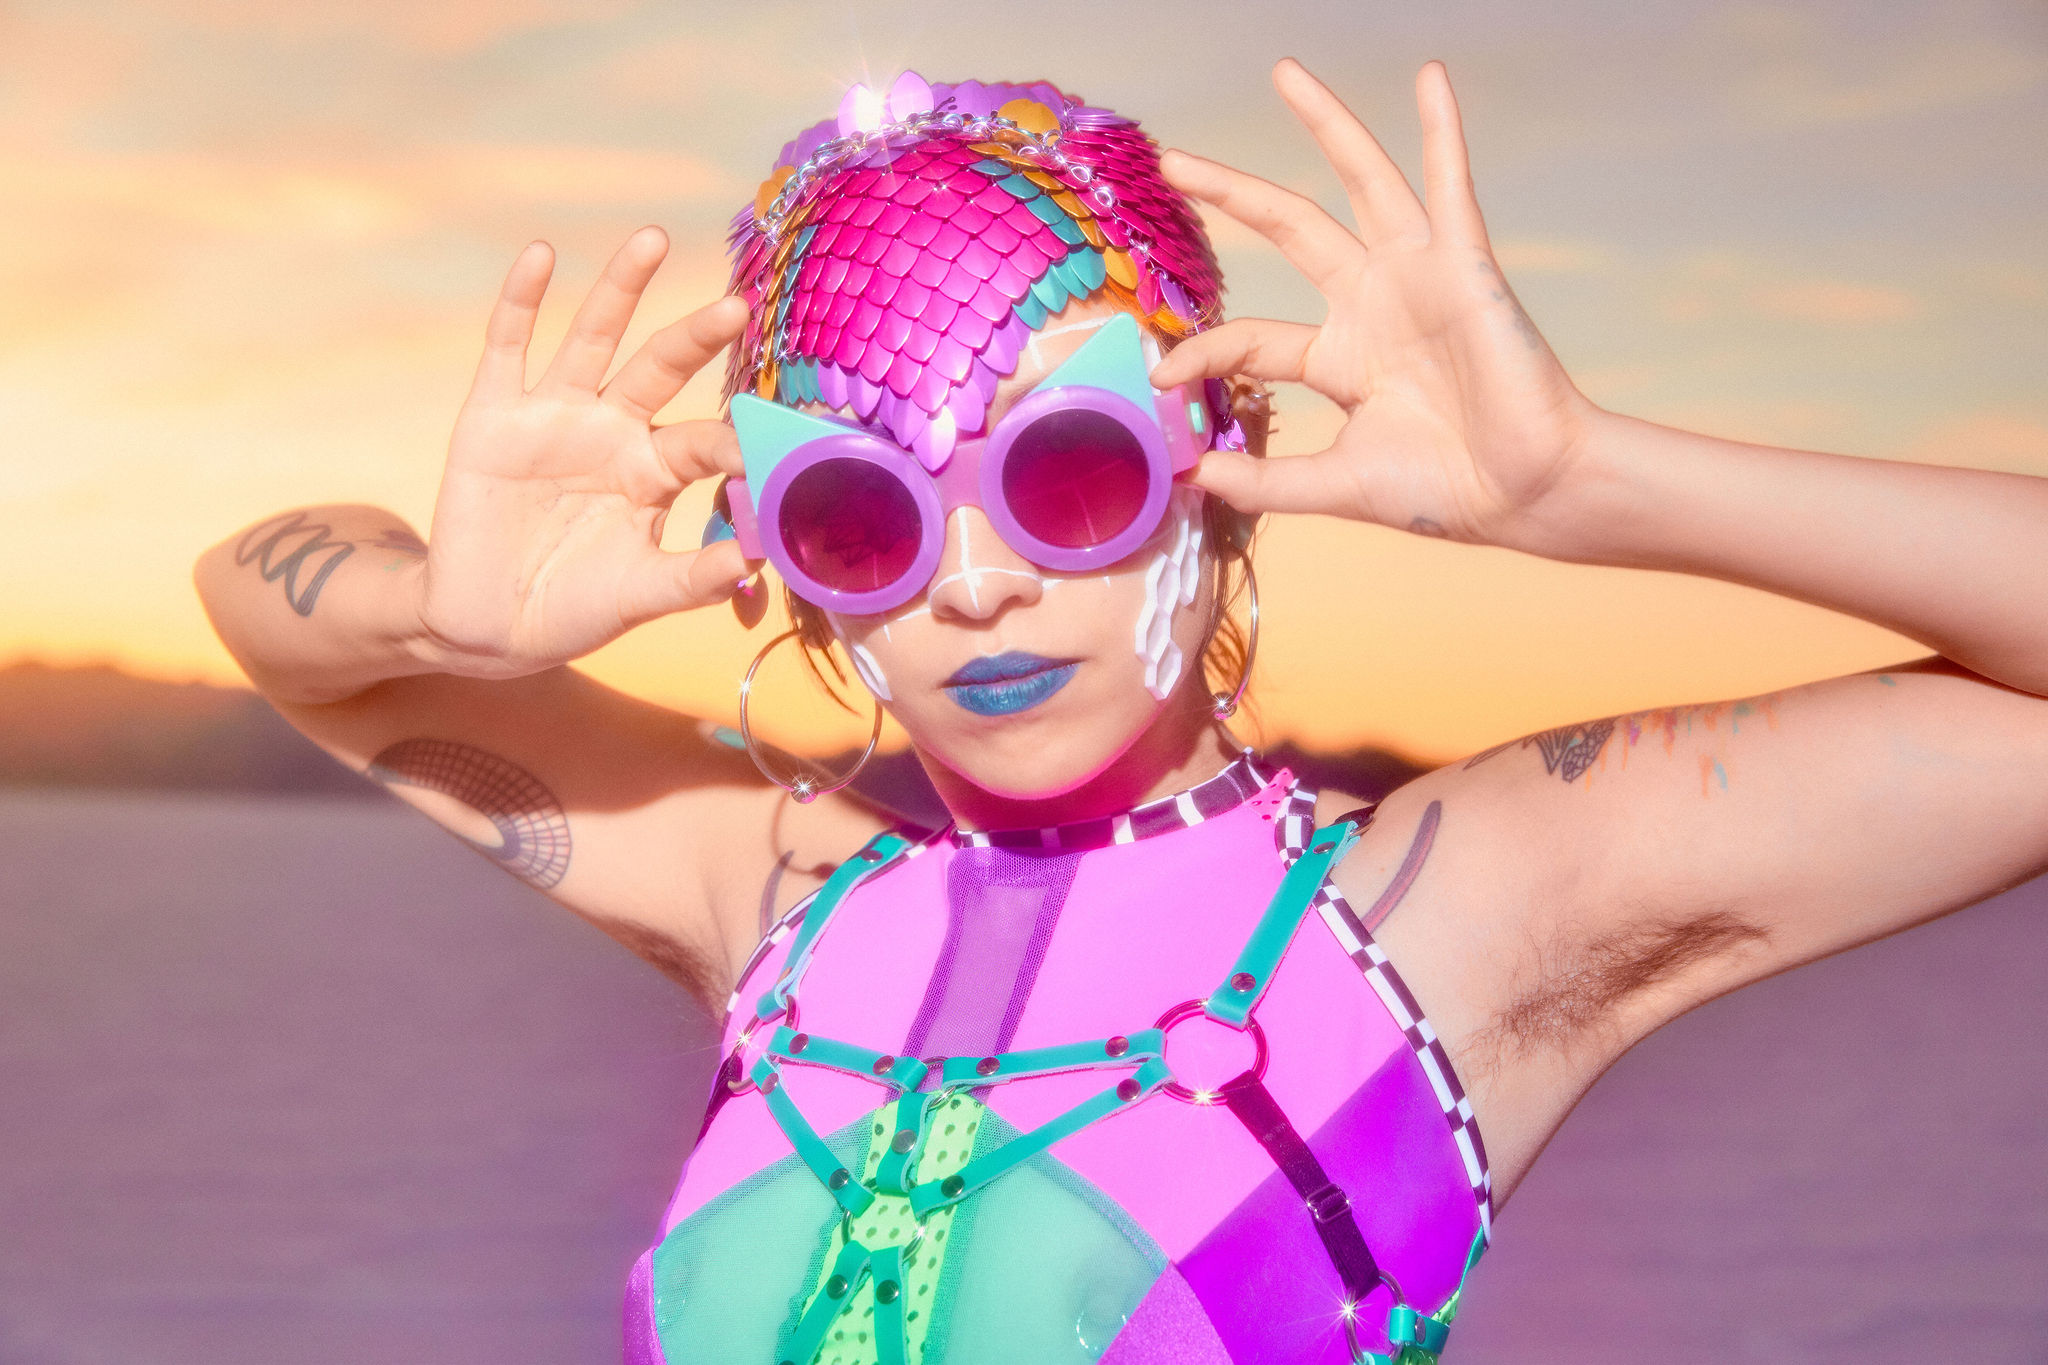 Photo of Sky Cubacub, a Filipinx nonbinary person modeling a skin tight cap made of bright metallic pink, teal, and gold fish scales, teal lipstick, round pink fashion sunglasses, hoop earrings, and a spandex pink and teal halter top with a matching harness.